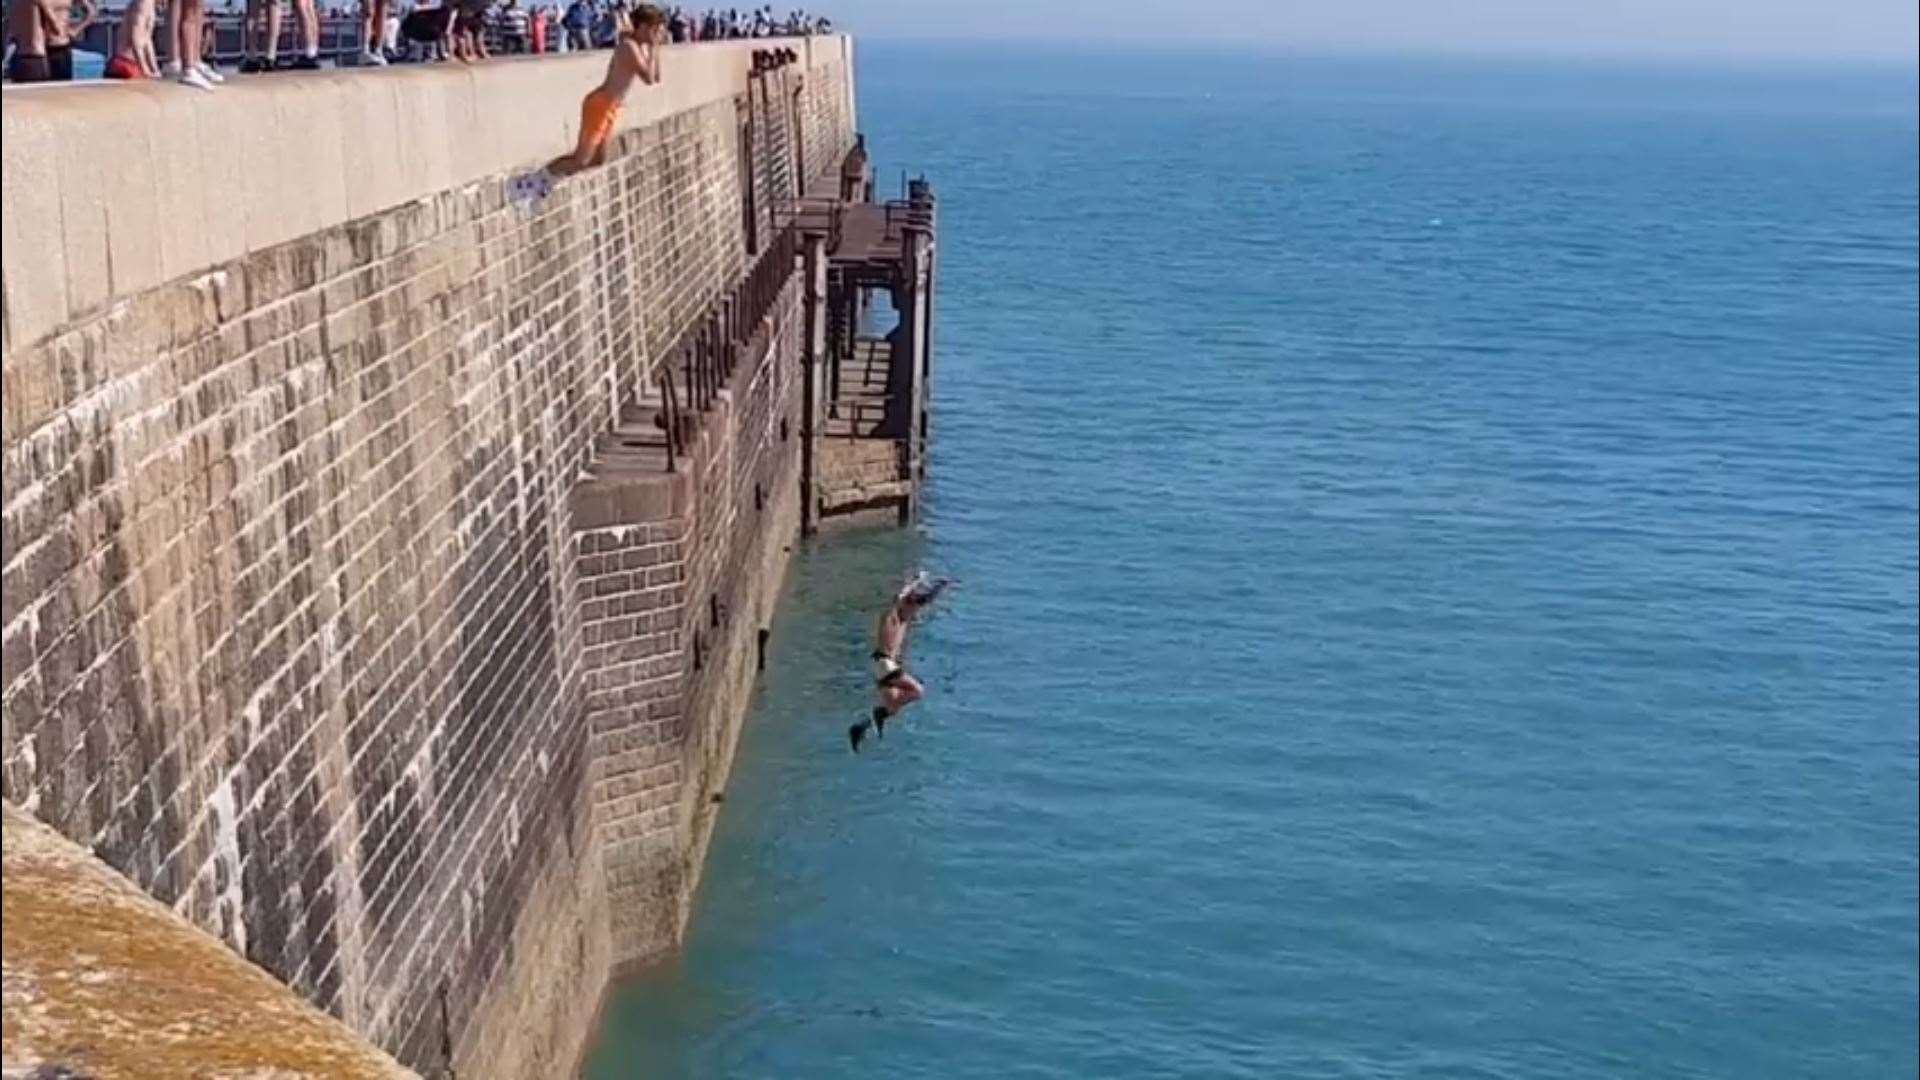 There have been 20 deaths from Tombstoning in recent years. Photo: Folkestone Rescue (15774780)